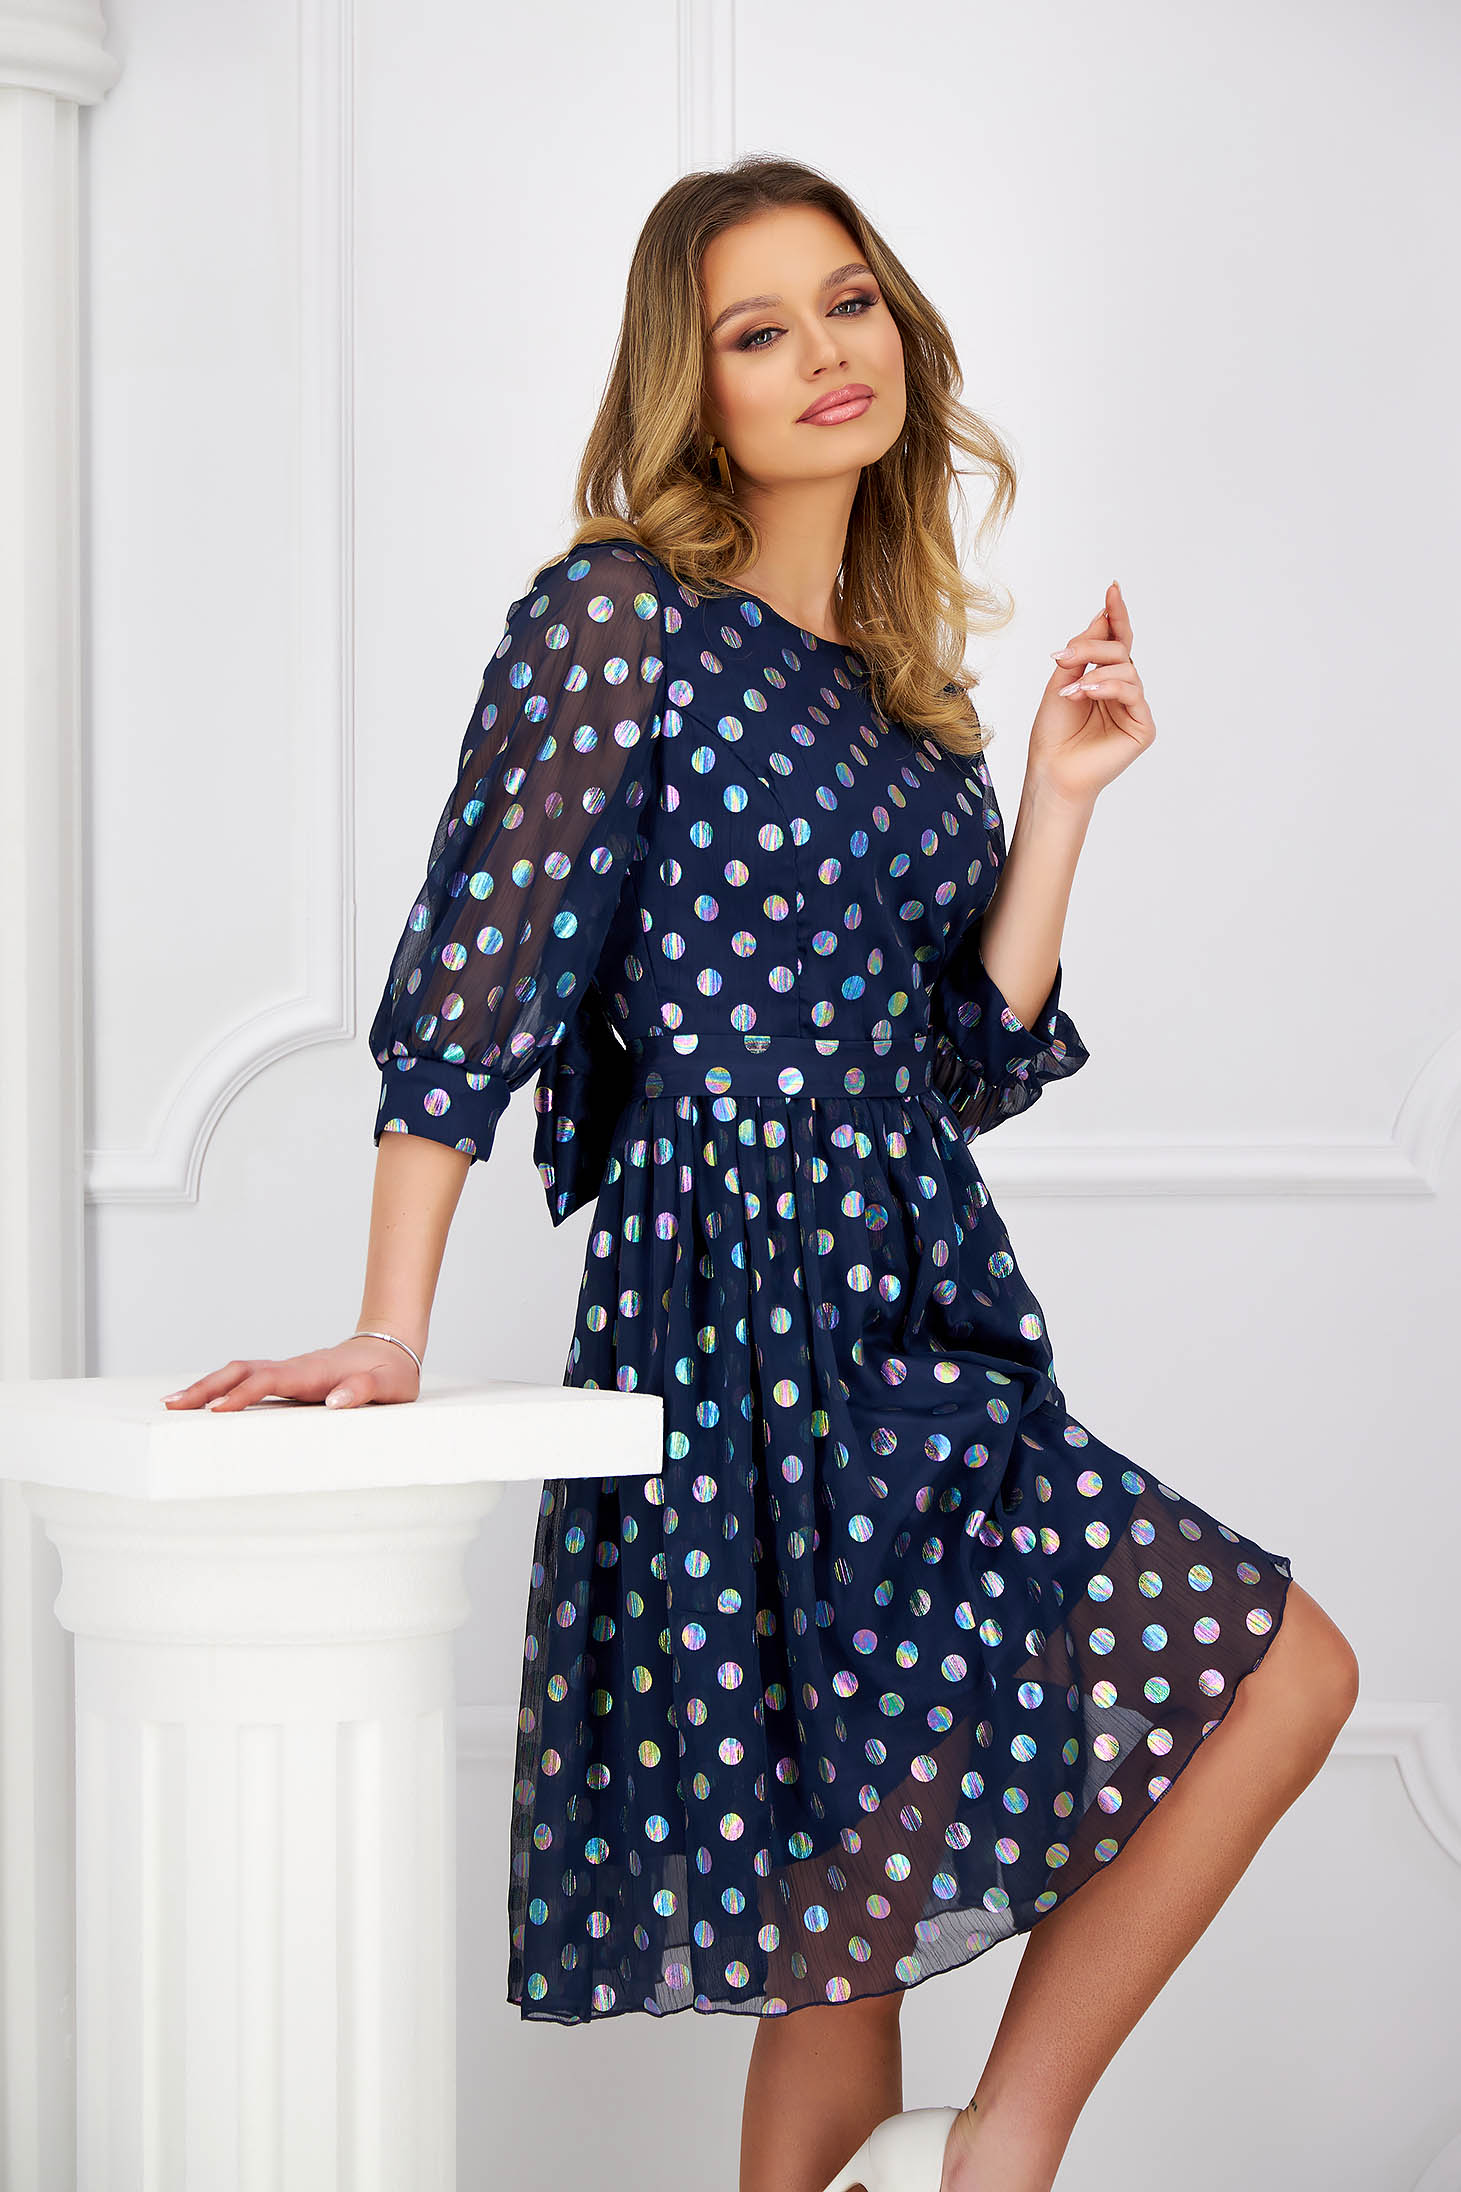 Veil dress in A-line with polka dots accessorized with belt and bow - StarShinerS 3 - StarShinerS.com